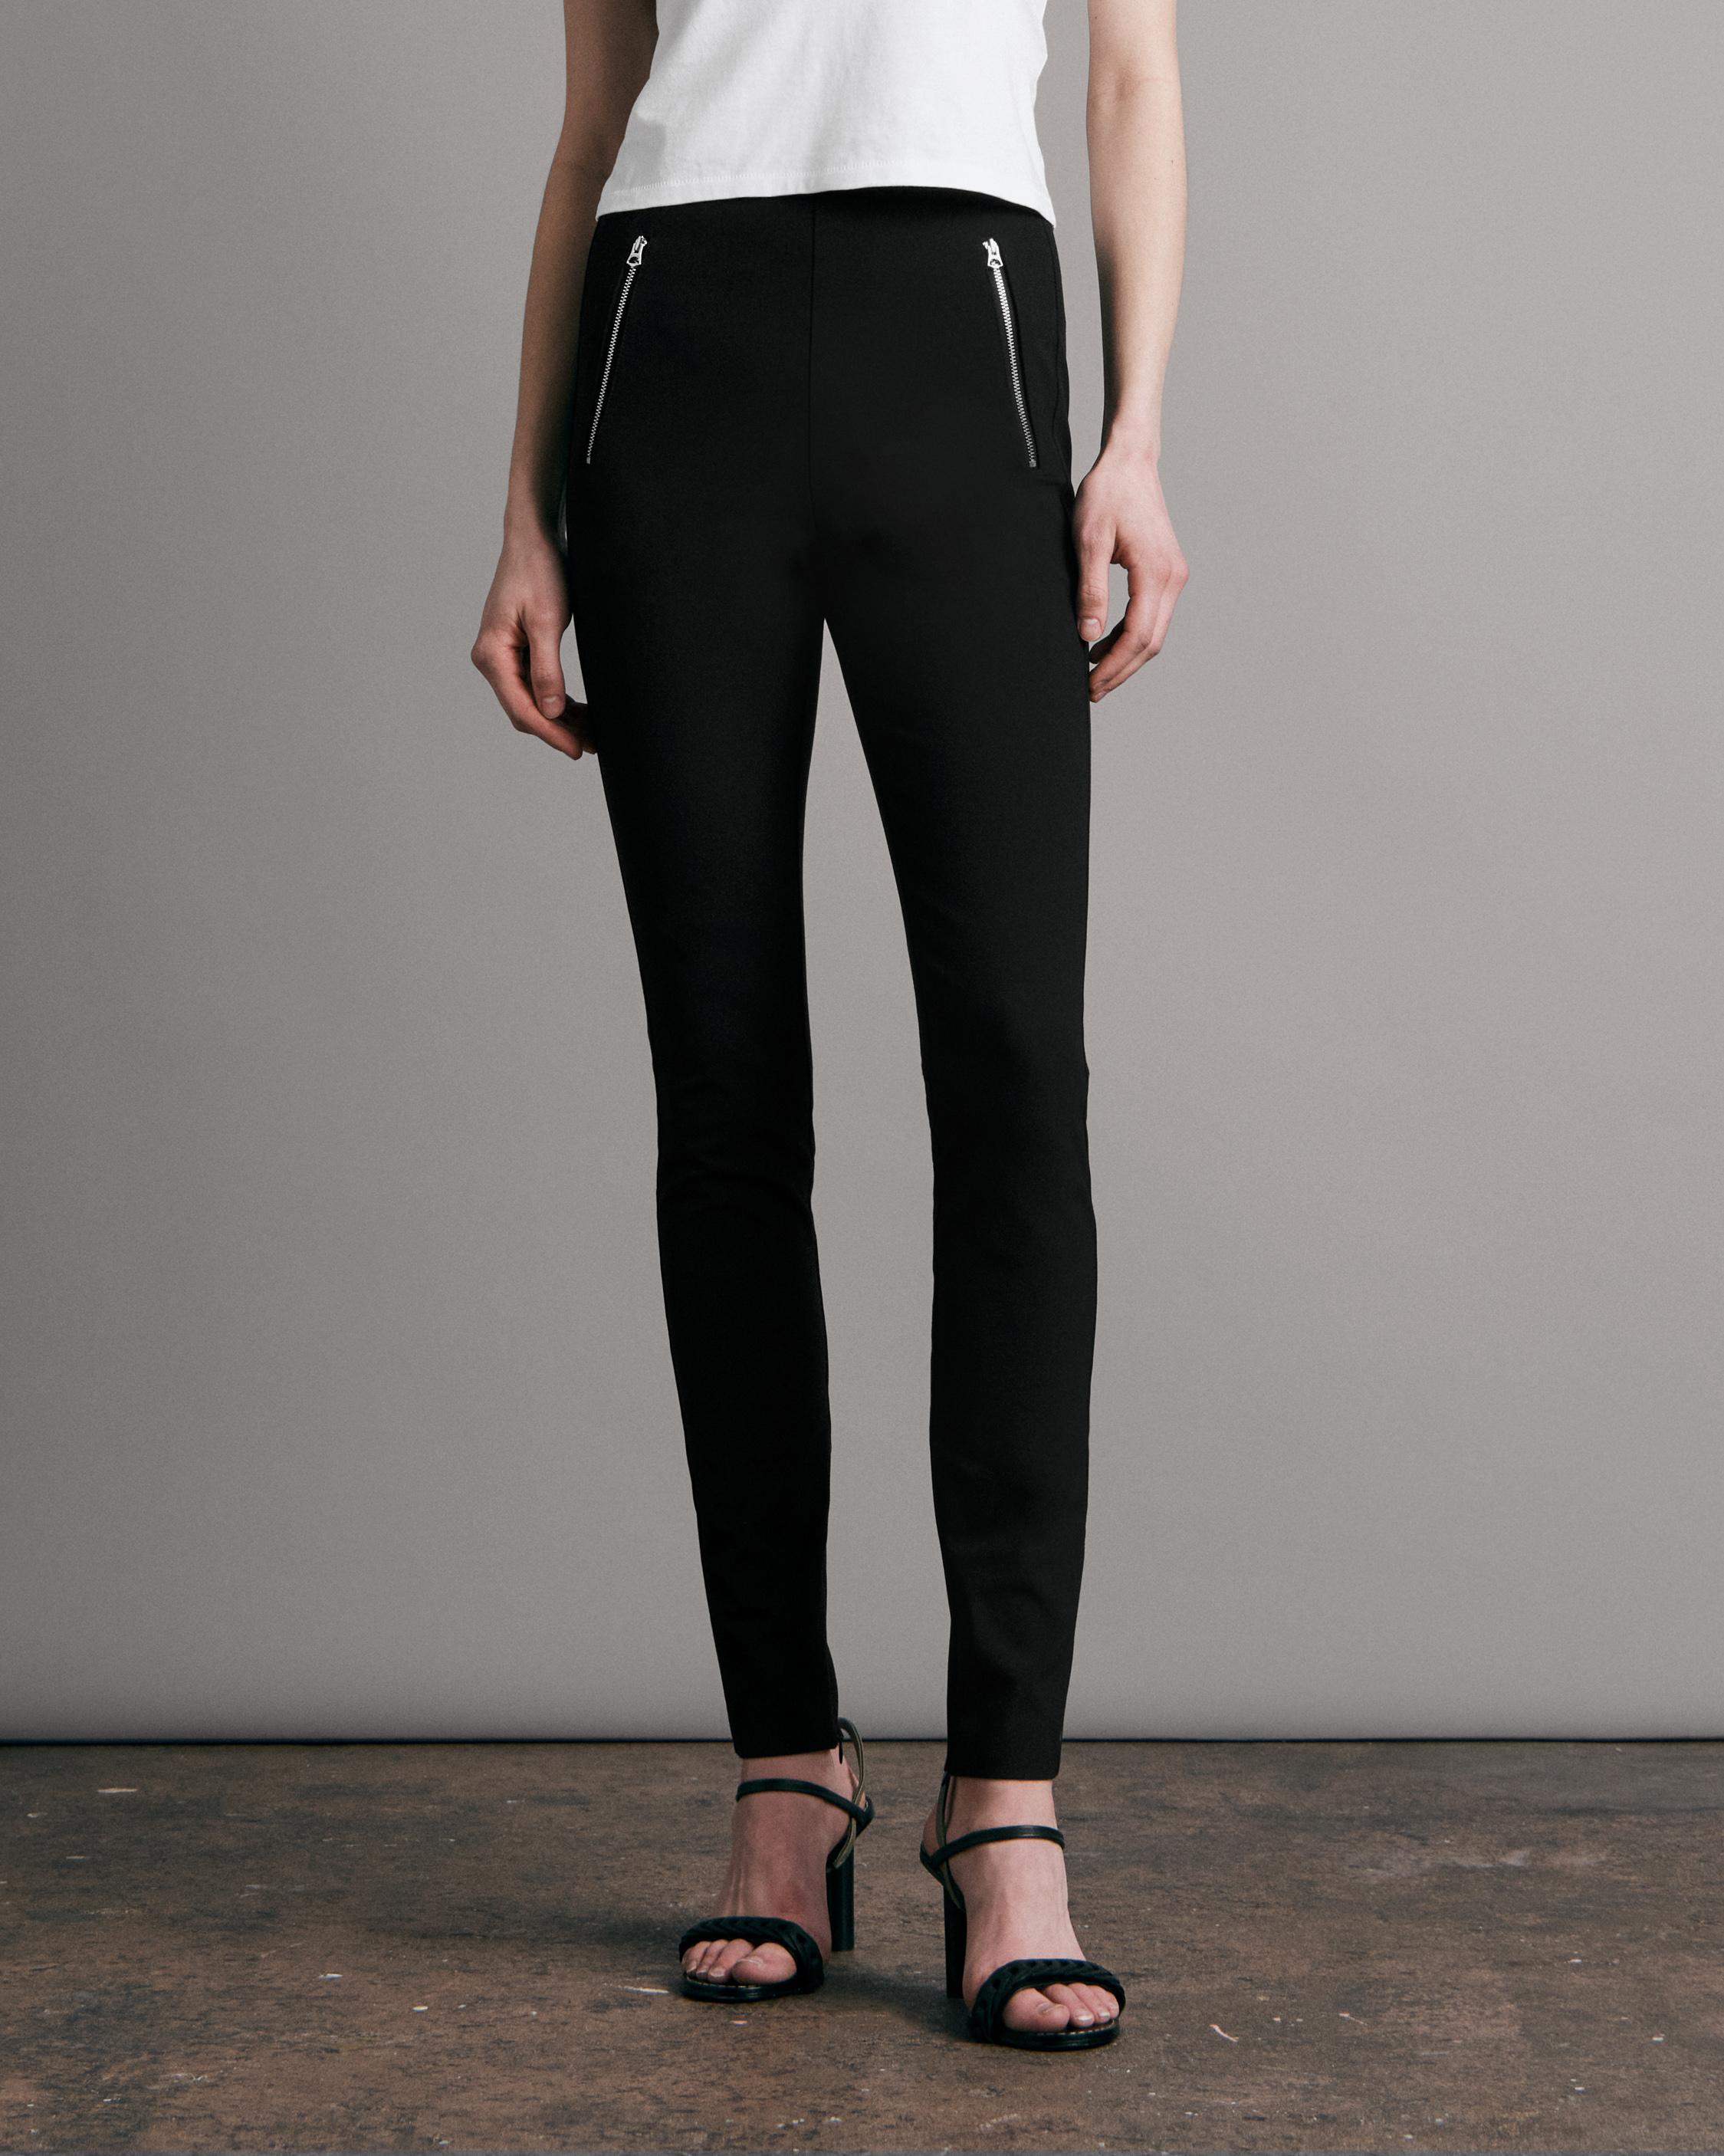 Simone Sport Pants with Ankle Zipper in Black